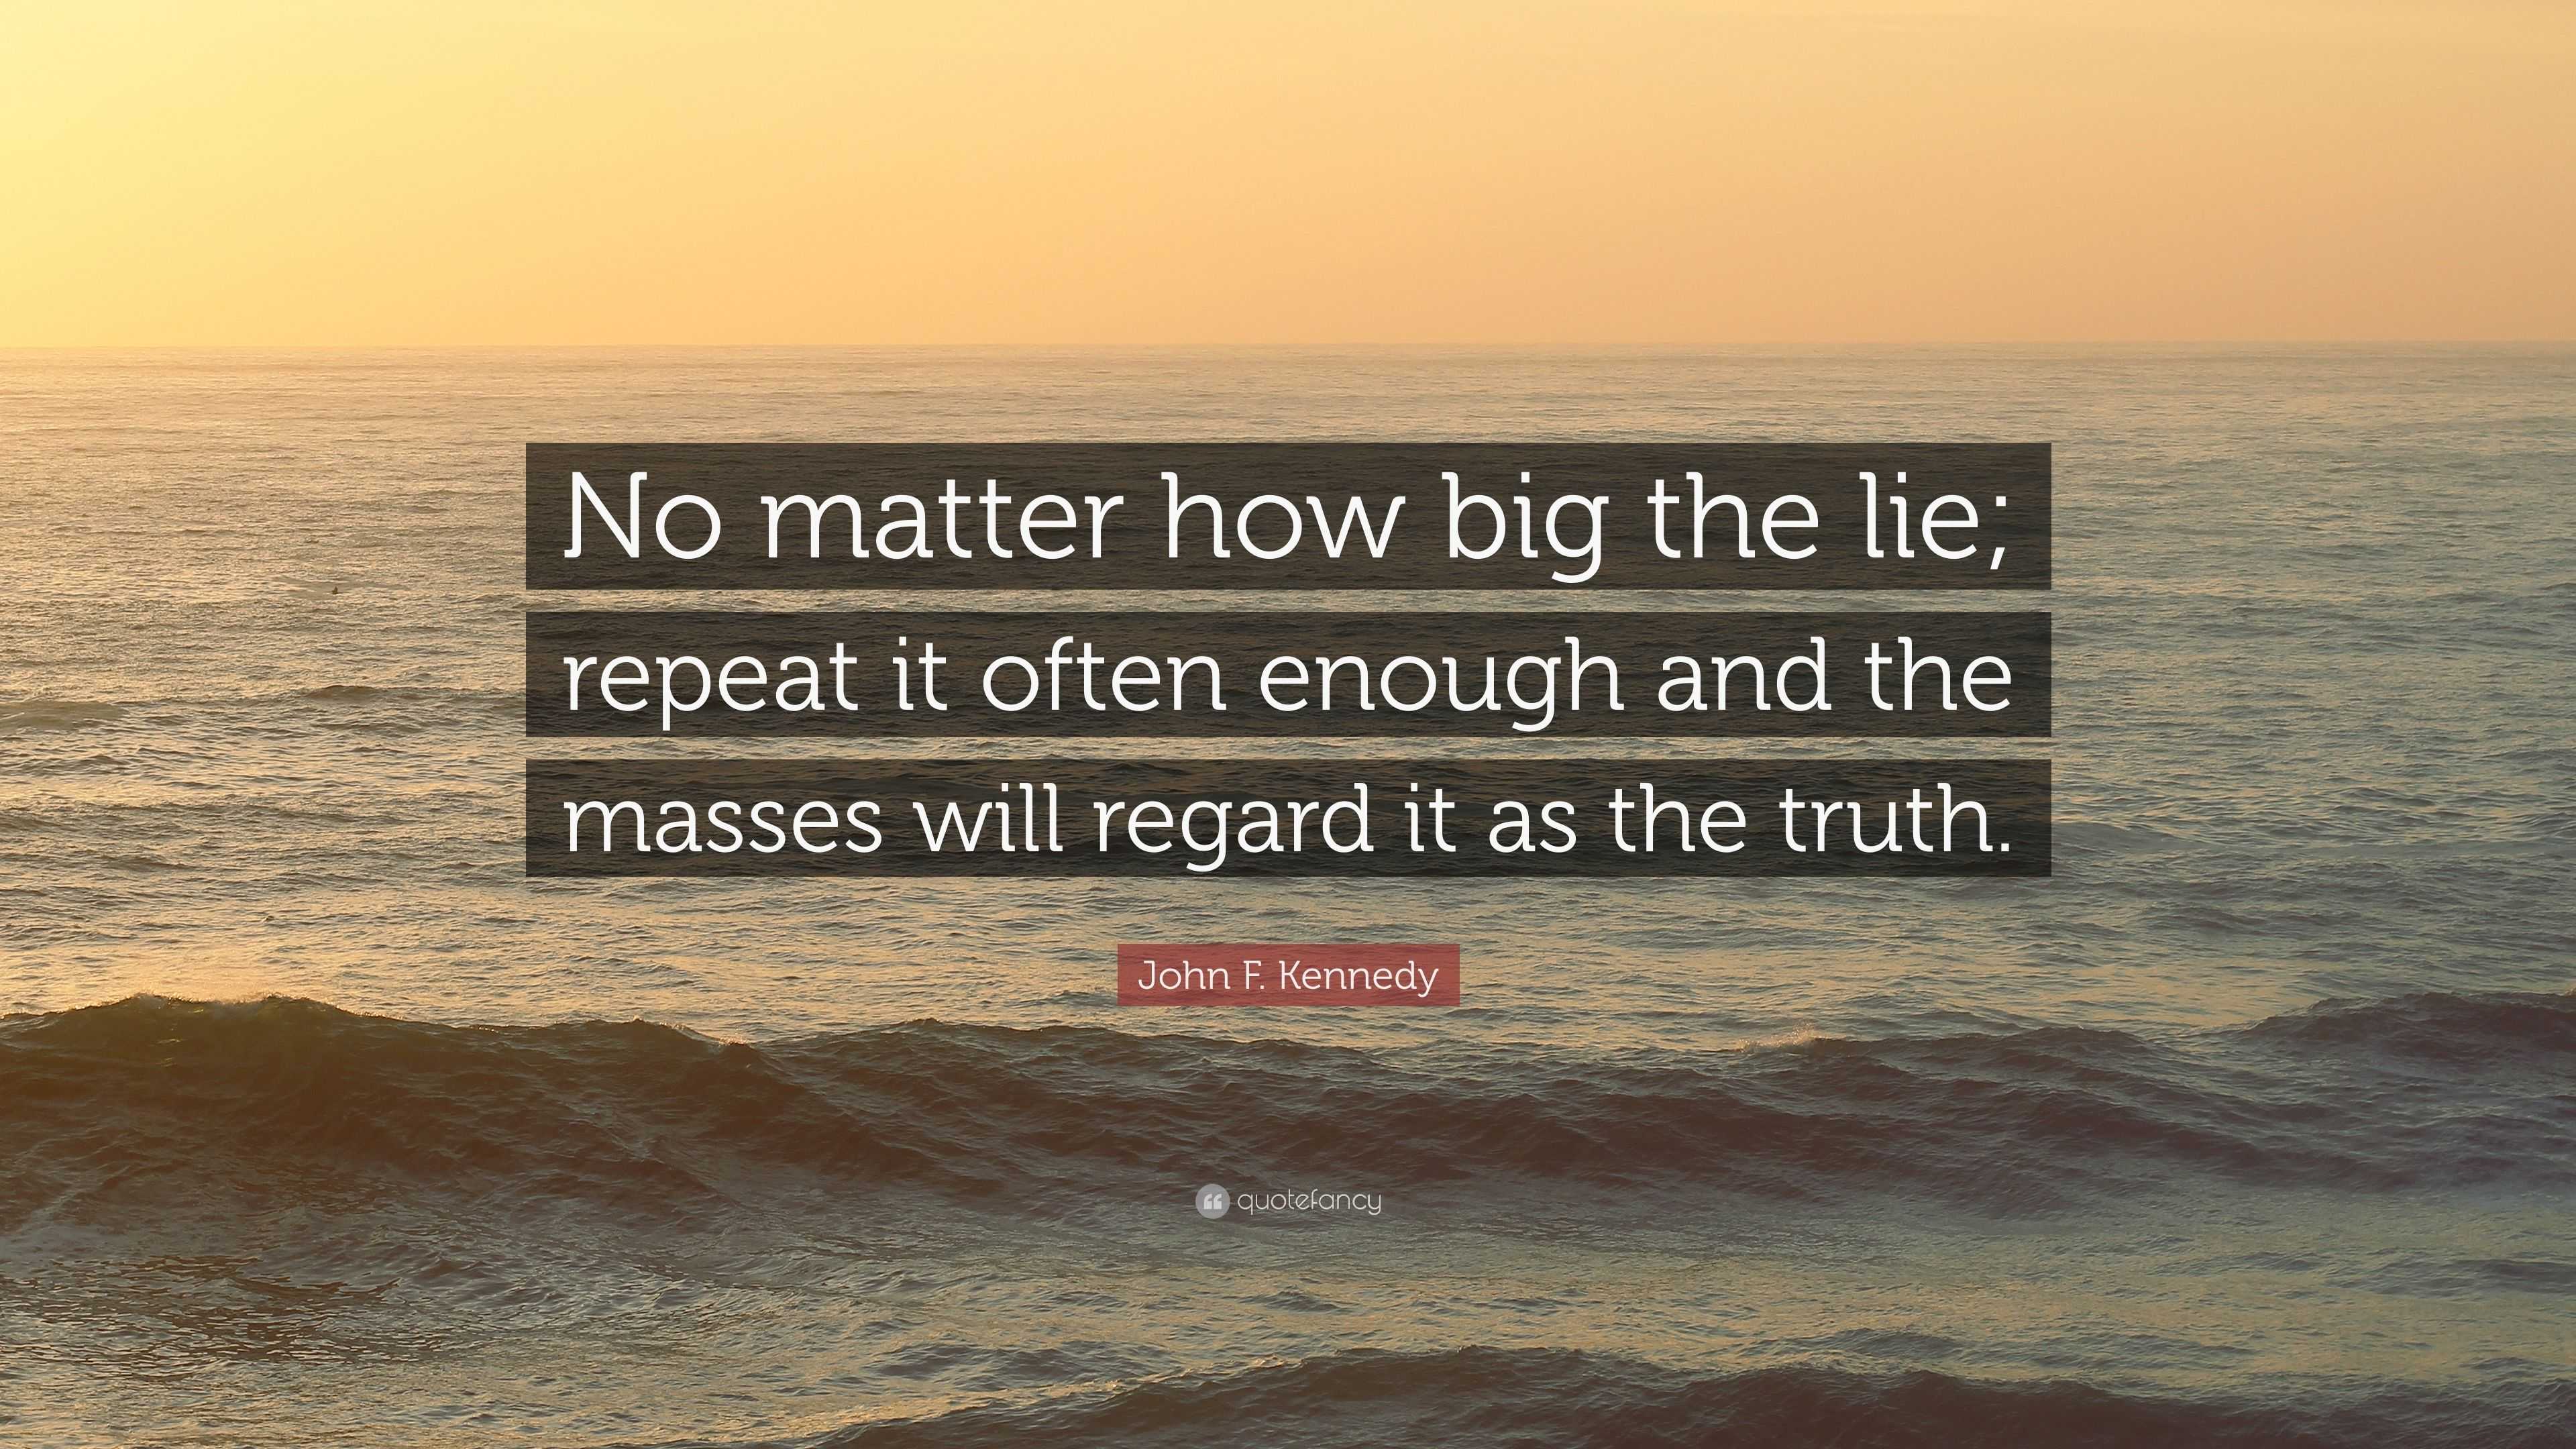 John F. Kennedy Quote: “No matter how big the lie; repeat it often